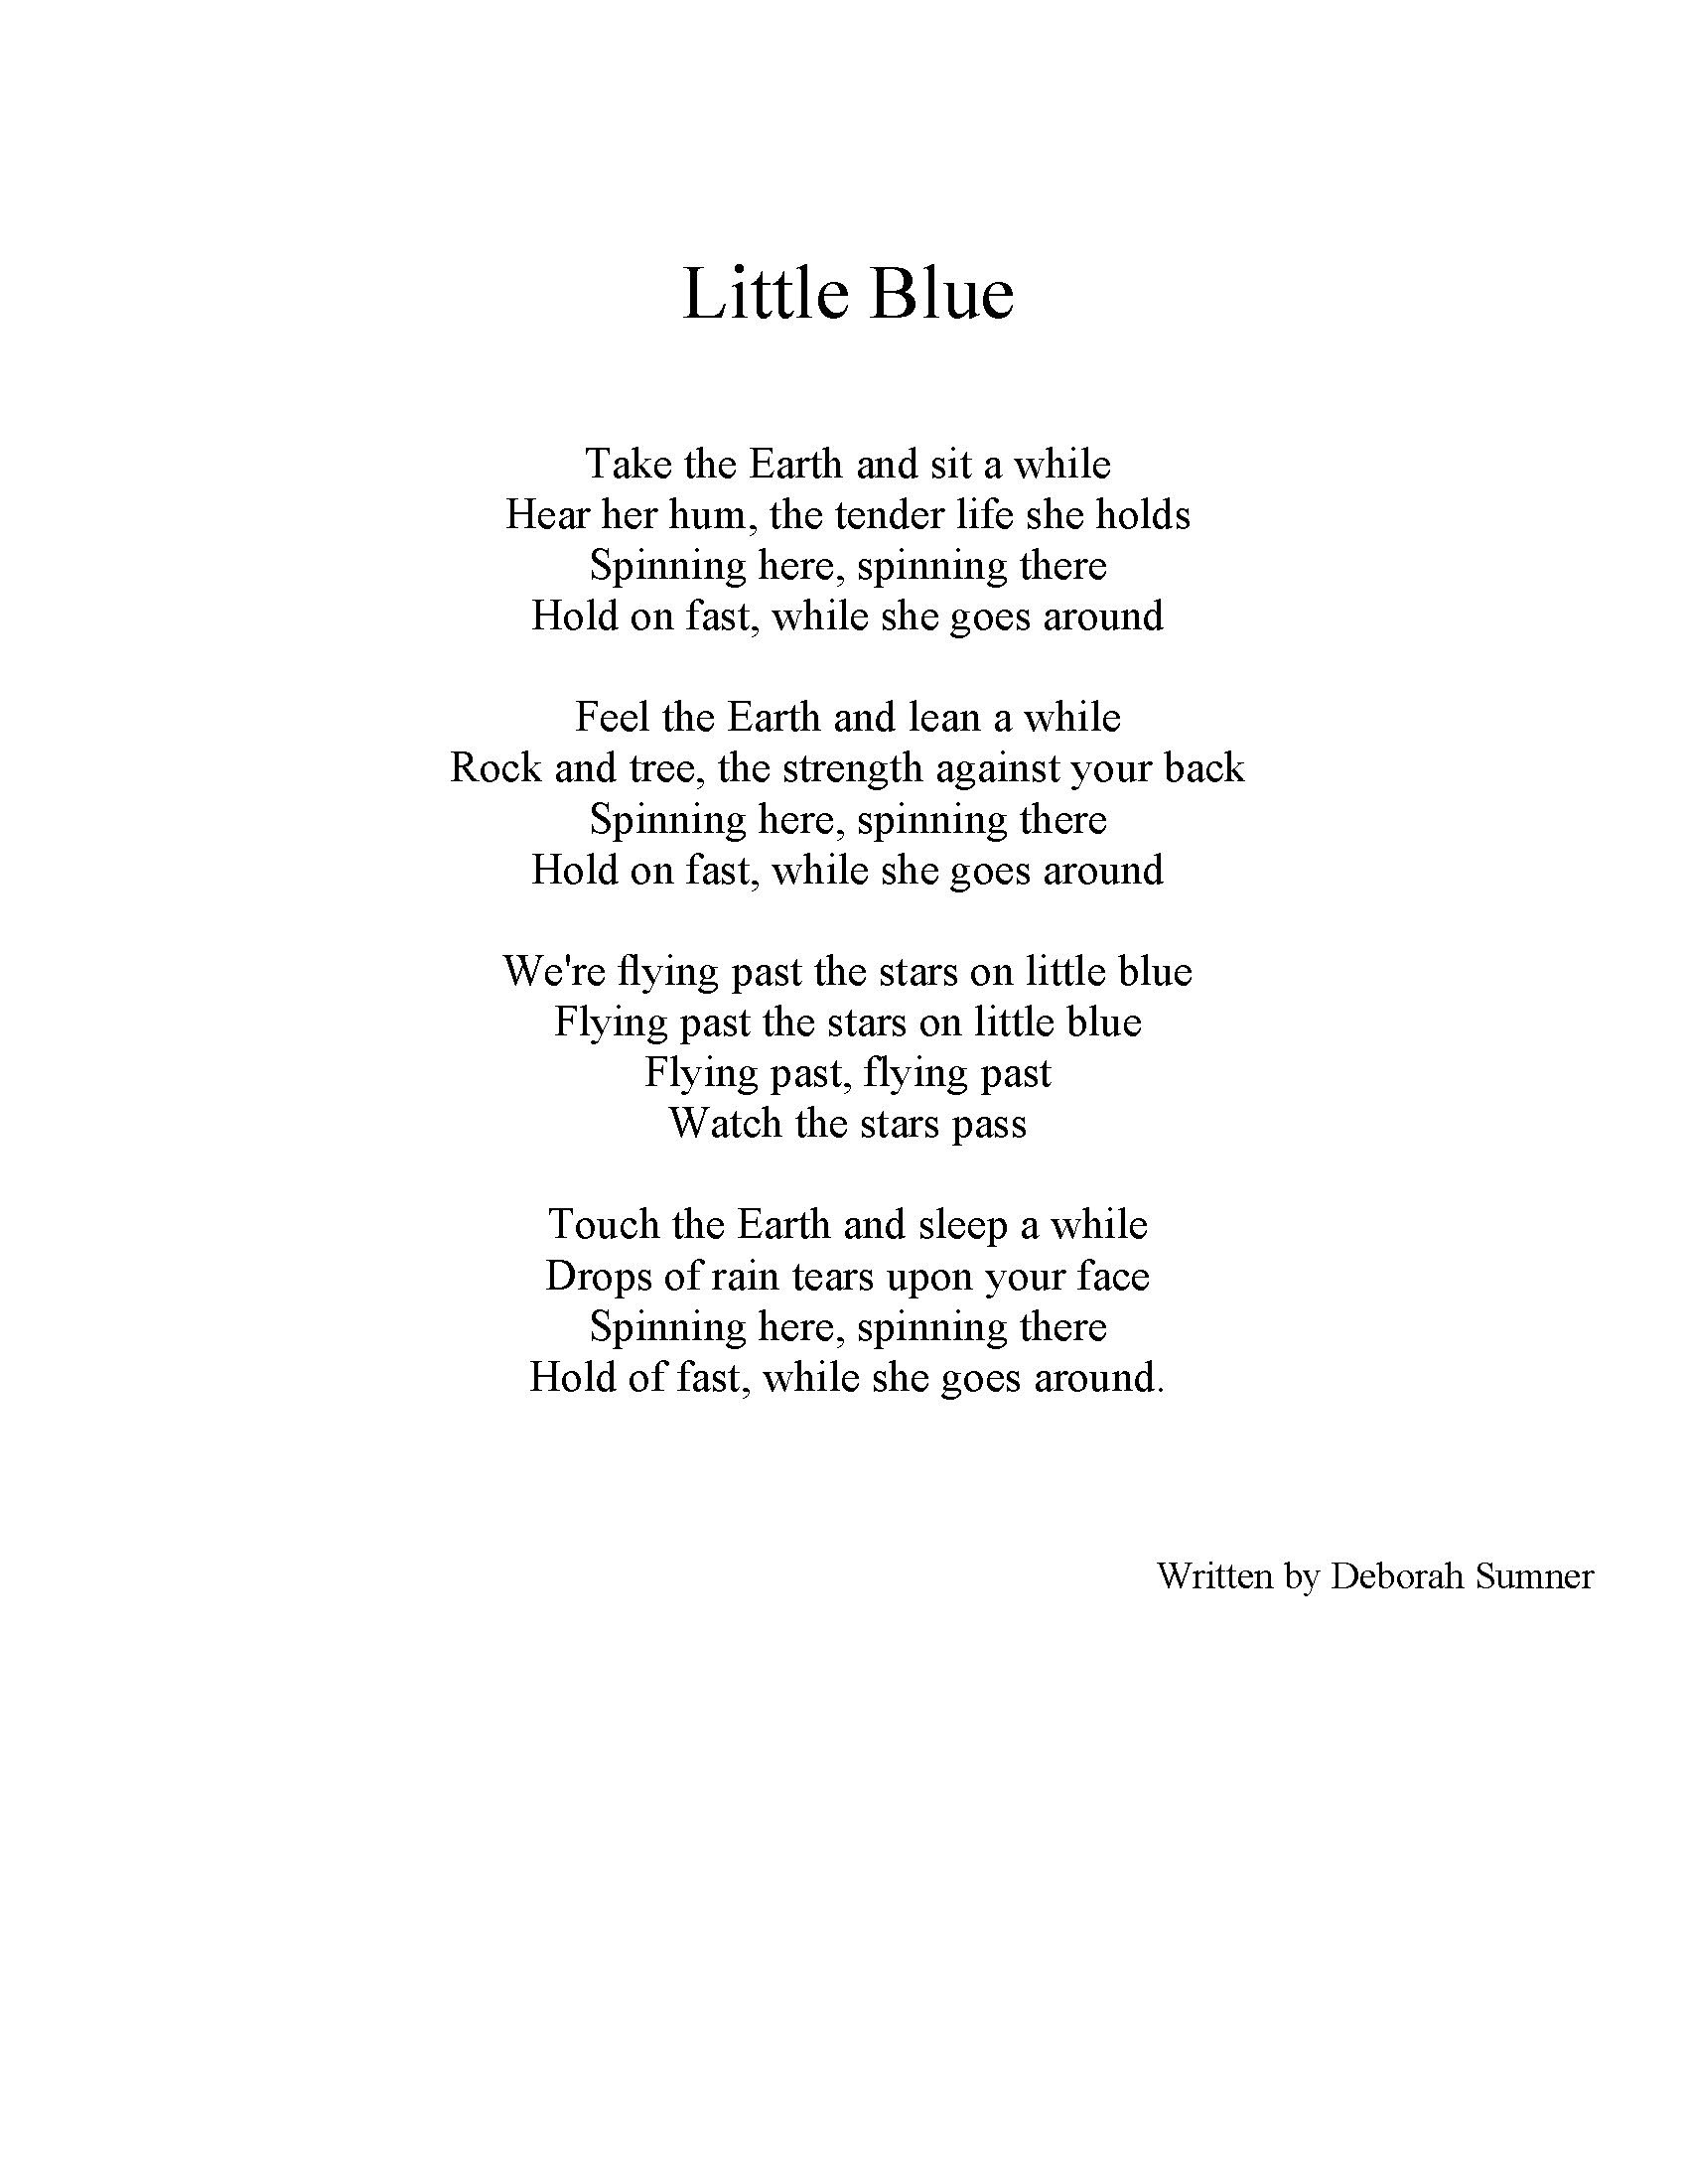 Little Blue - Lyrics Sheet and Composer Notes_Page_1.jpg